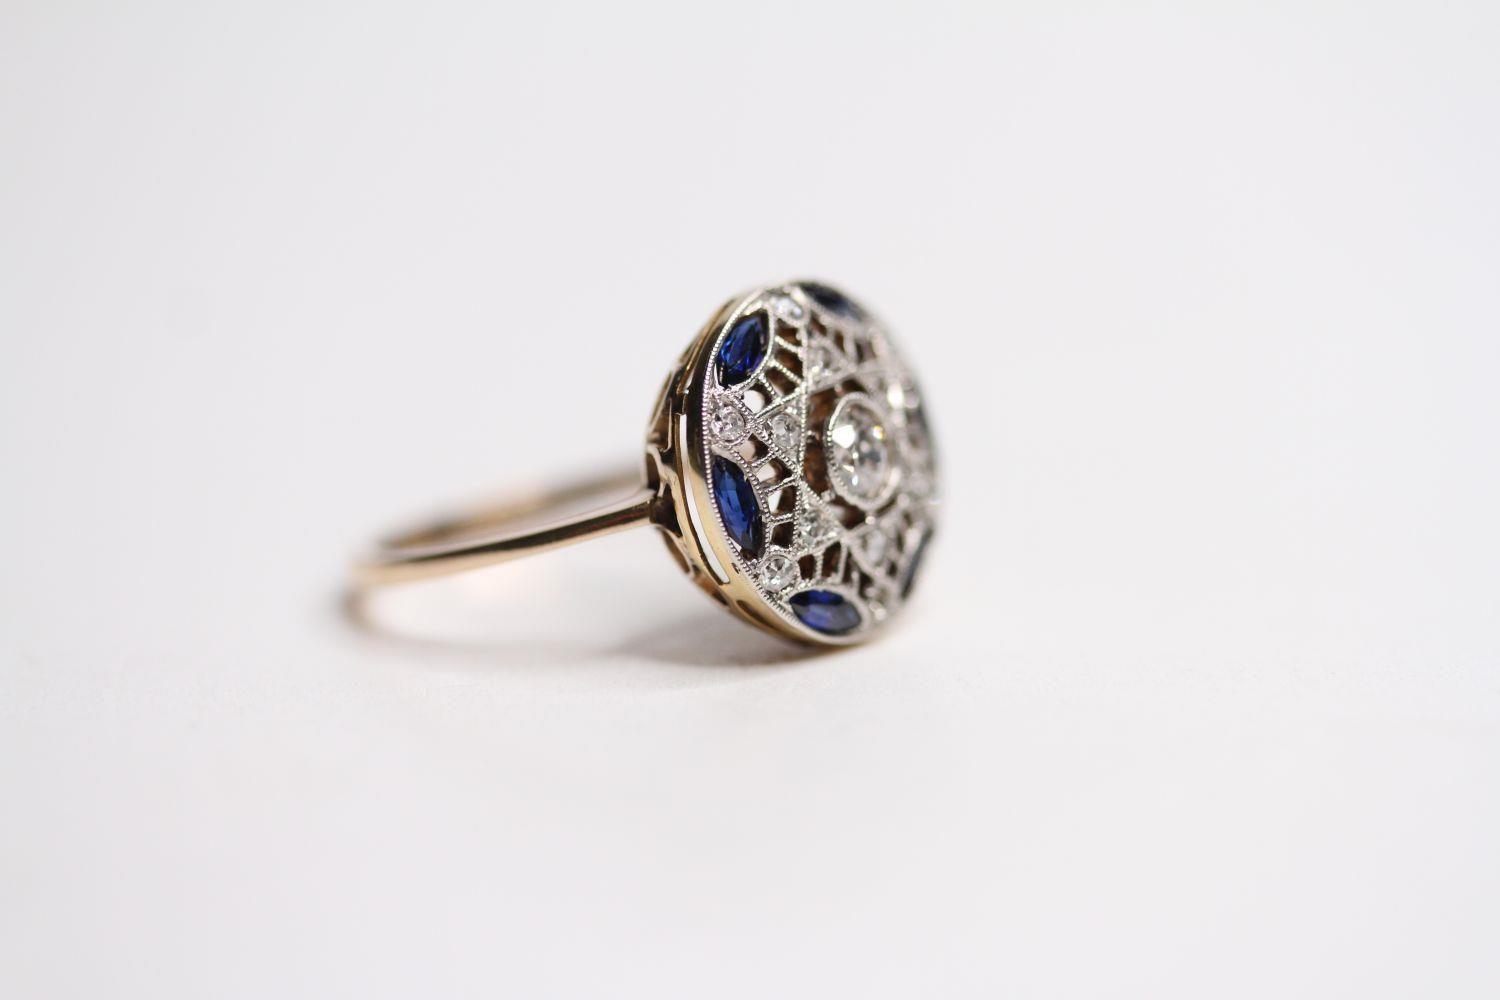 Deco Sapphire & Diamond Ring, centre shaped as a star, yellow gold, size N. - Image 2 of 3